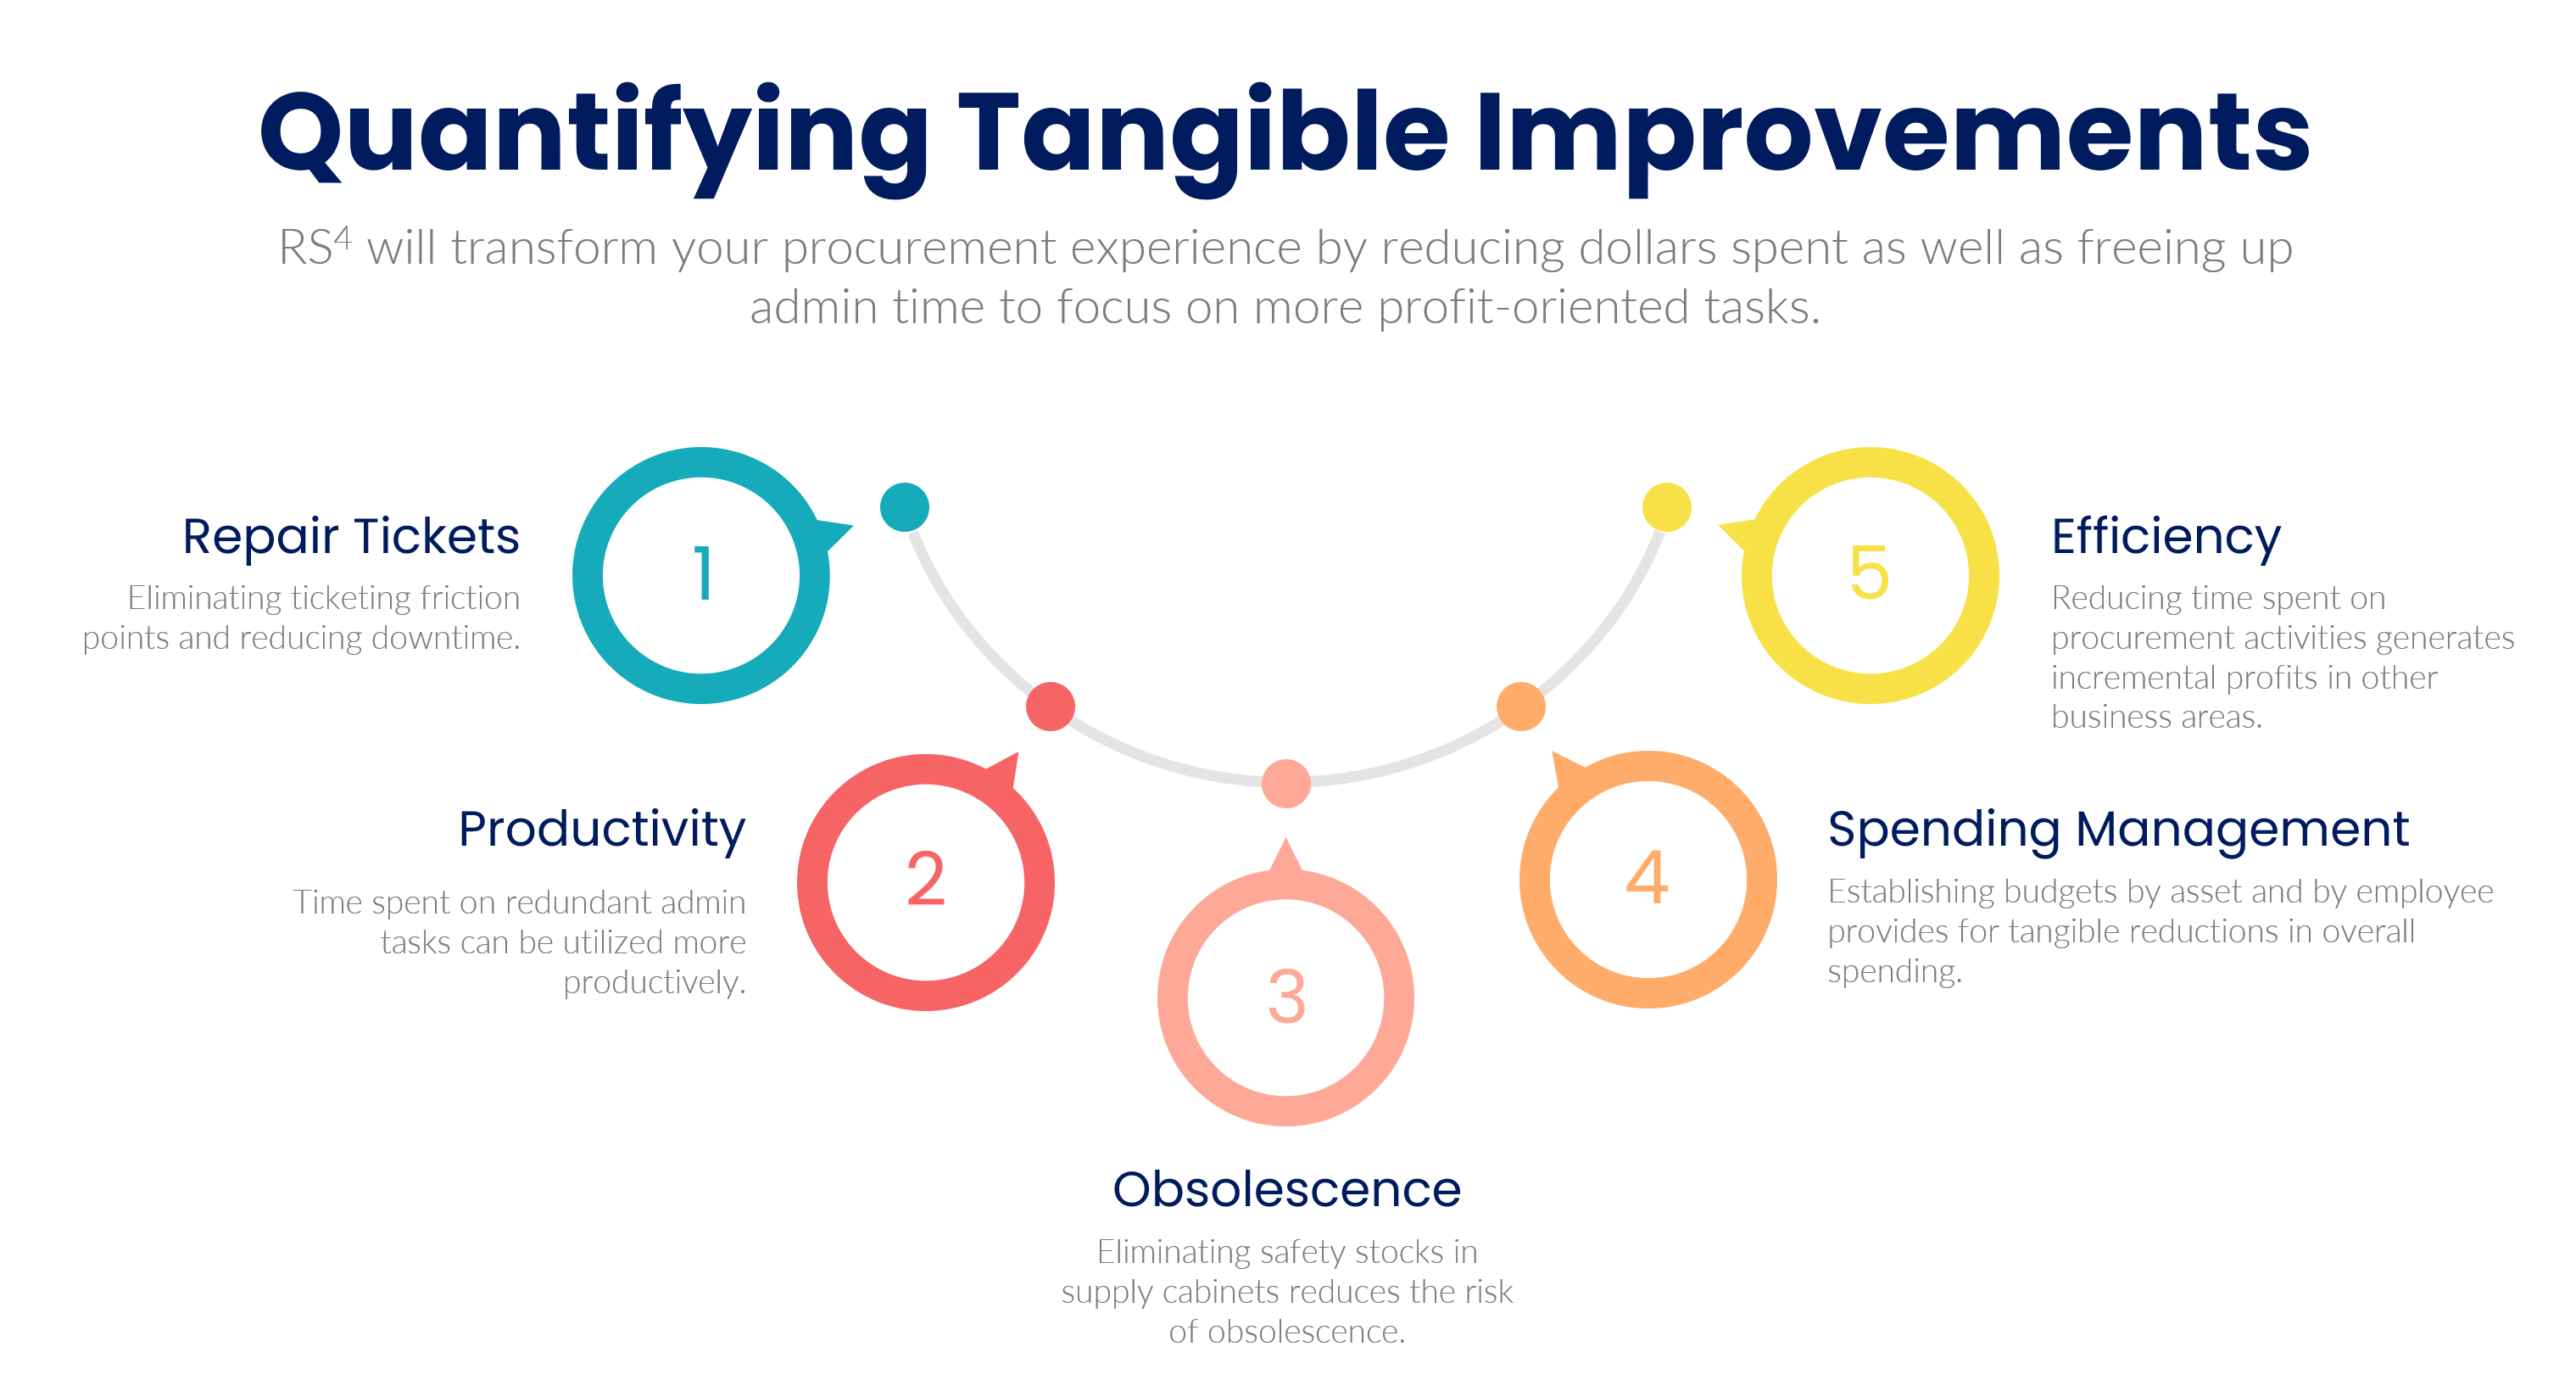 RS4 and Quantifying Tangible Business Improvements